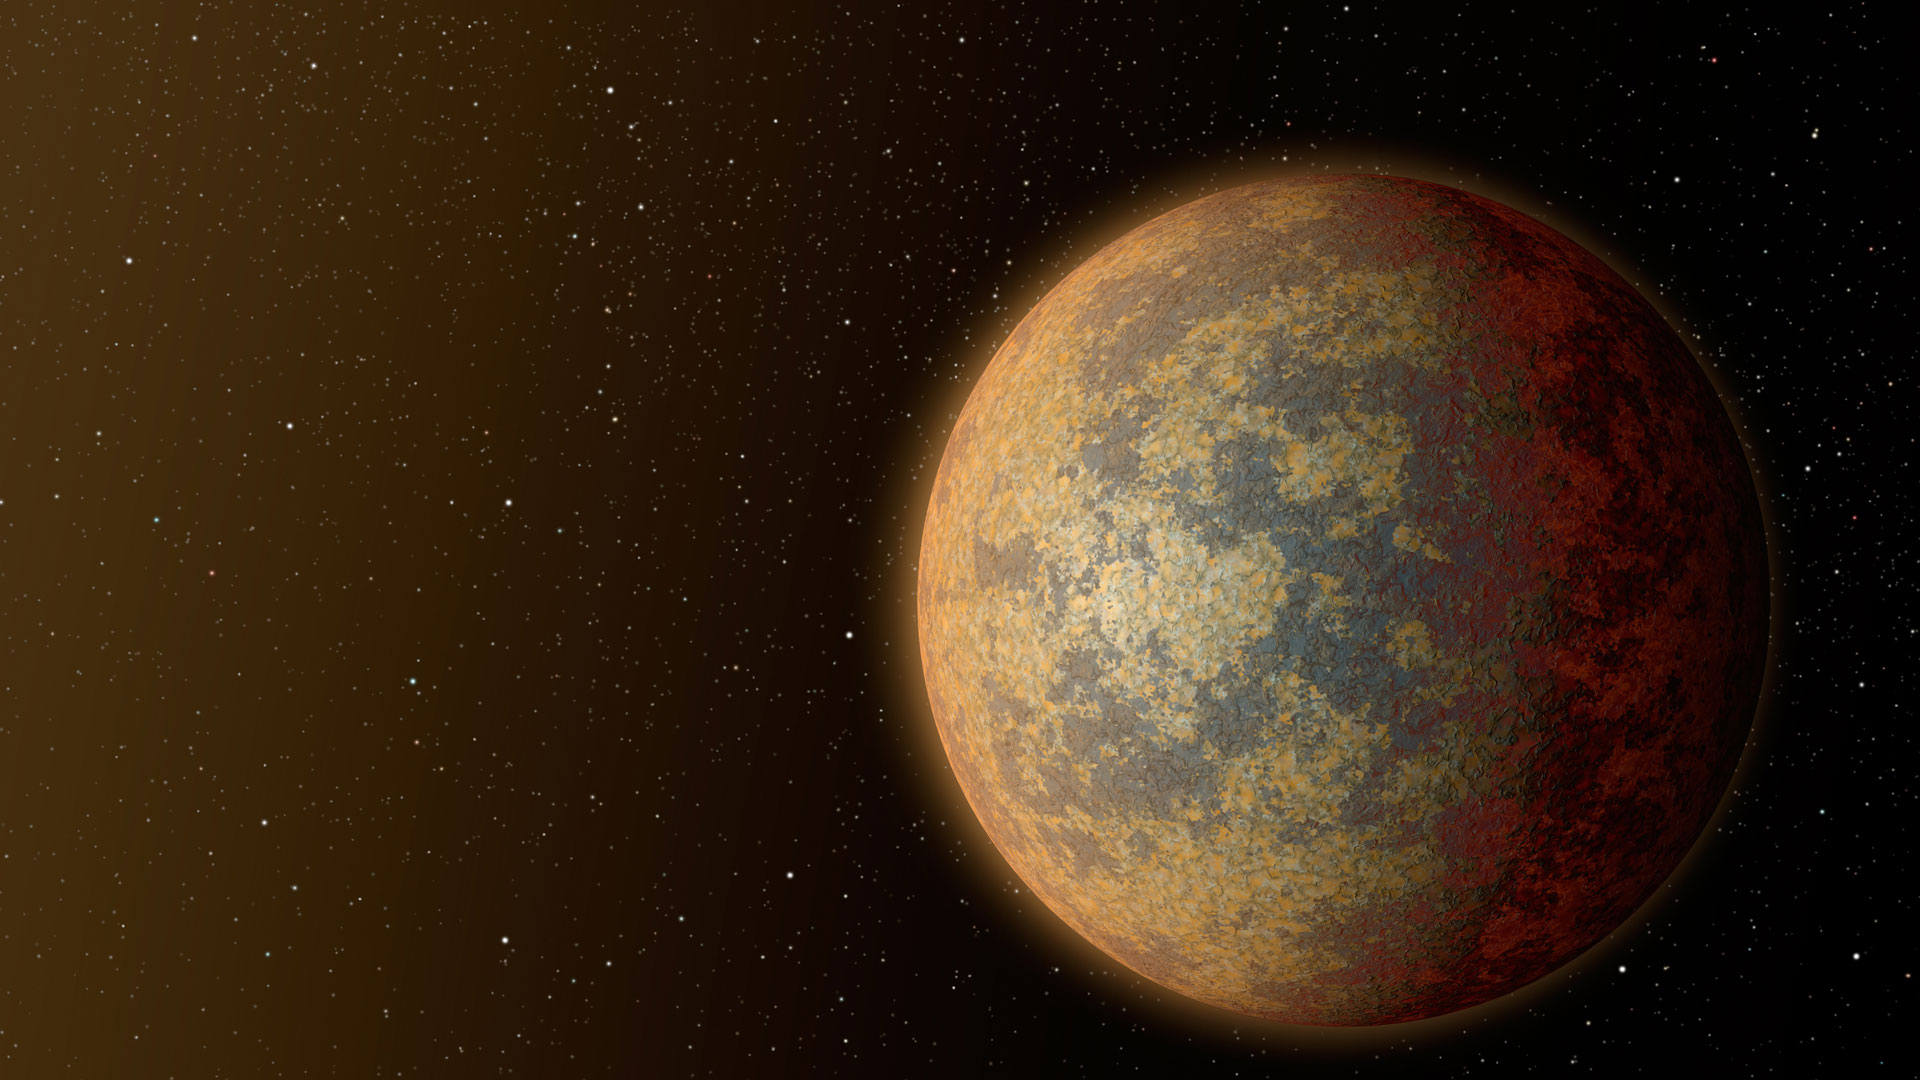 Spitzer Confirms Rocky Exoplanet HD 219134b, about 1.6 Times the Size of Earth1920 x 1080